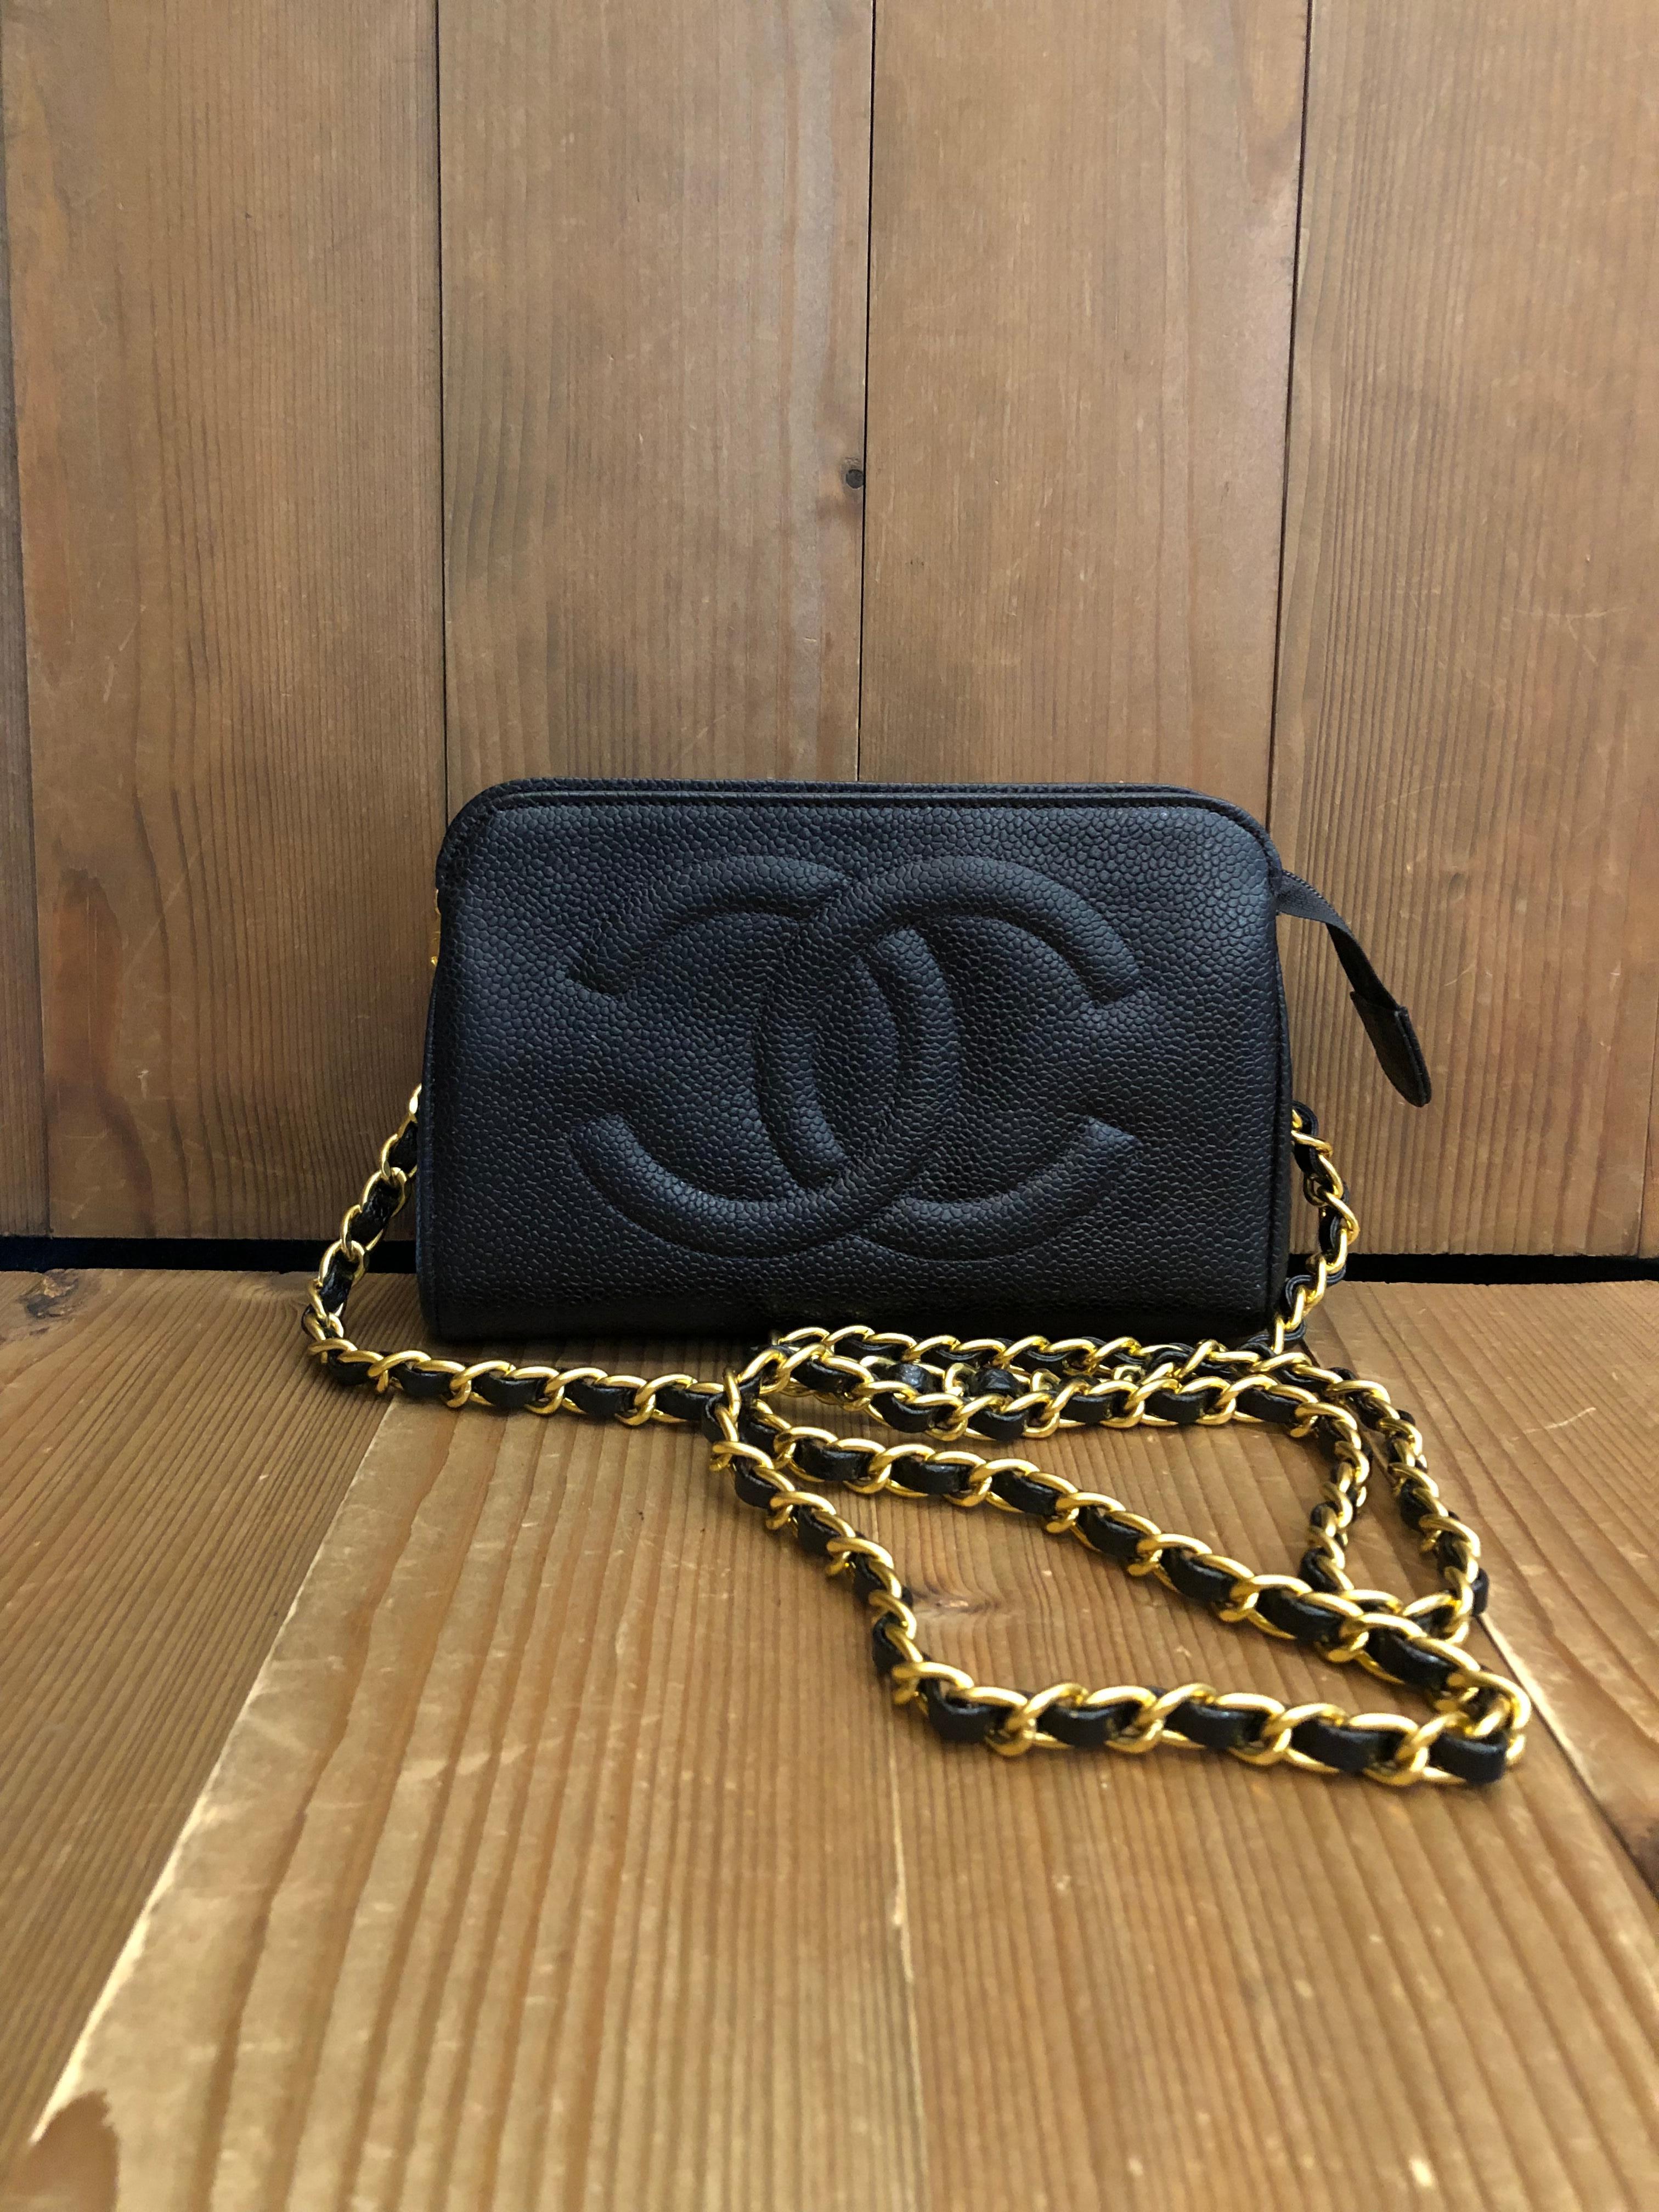 Vintage CHANEL Black Caviar Leather Pouch Bag Clutch (Altered) 1